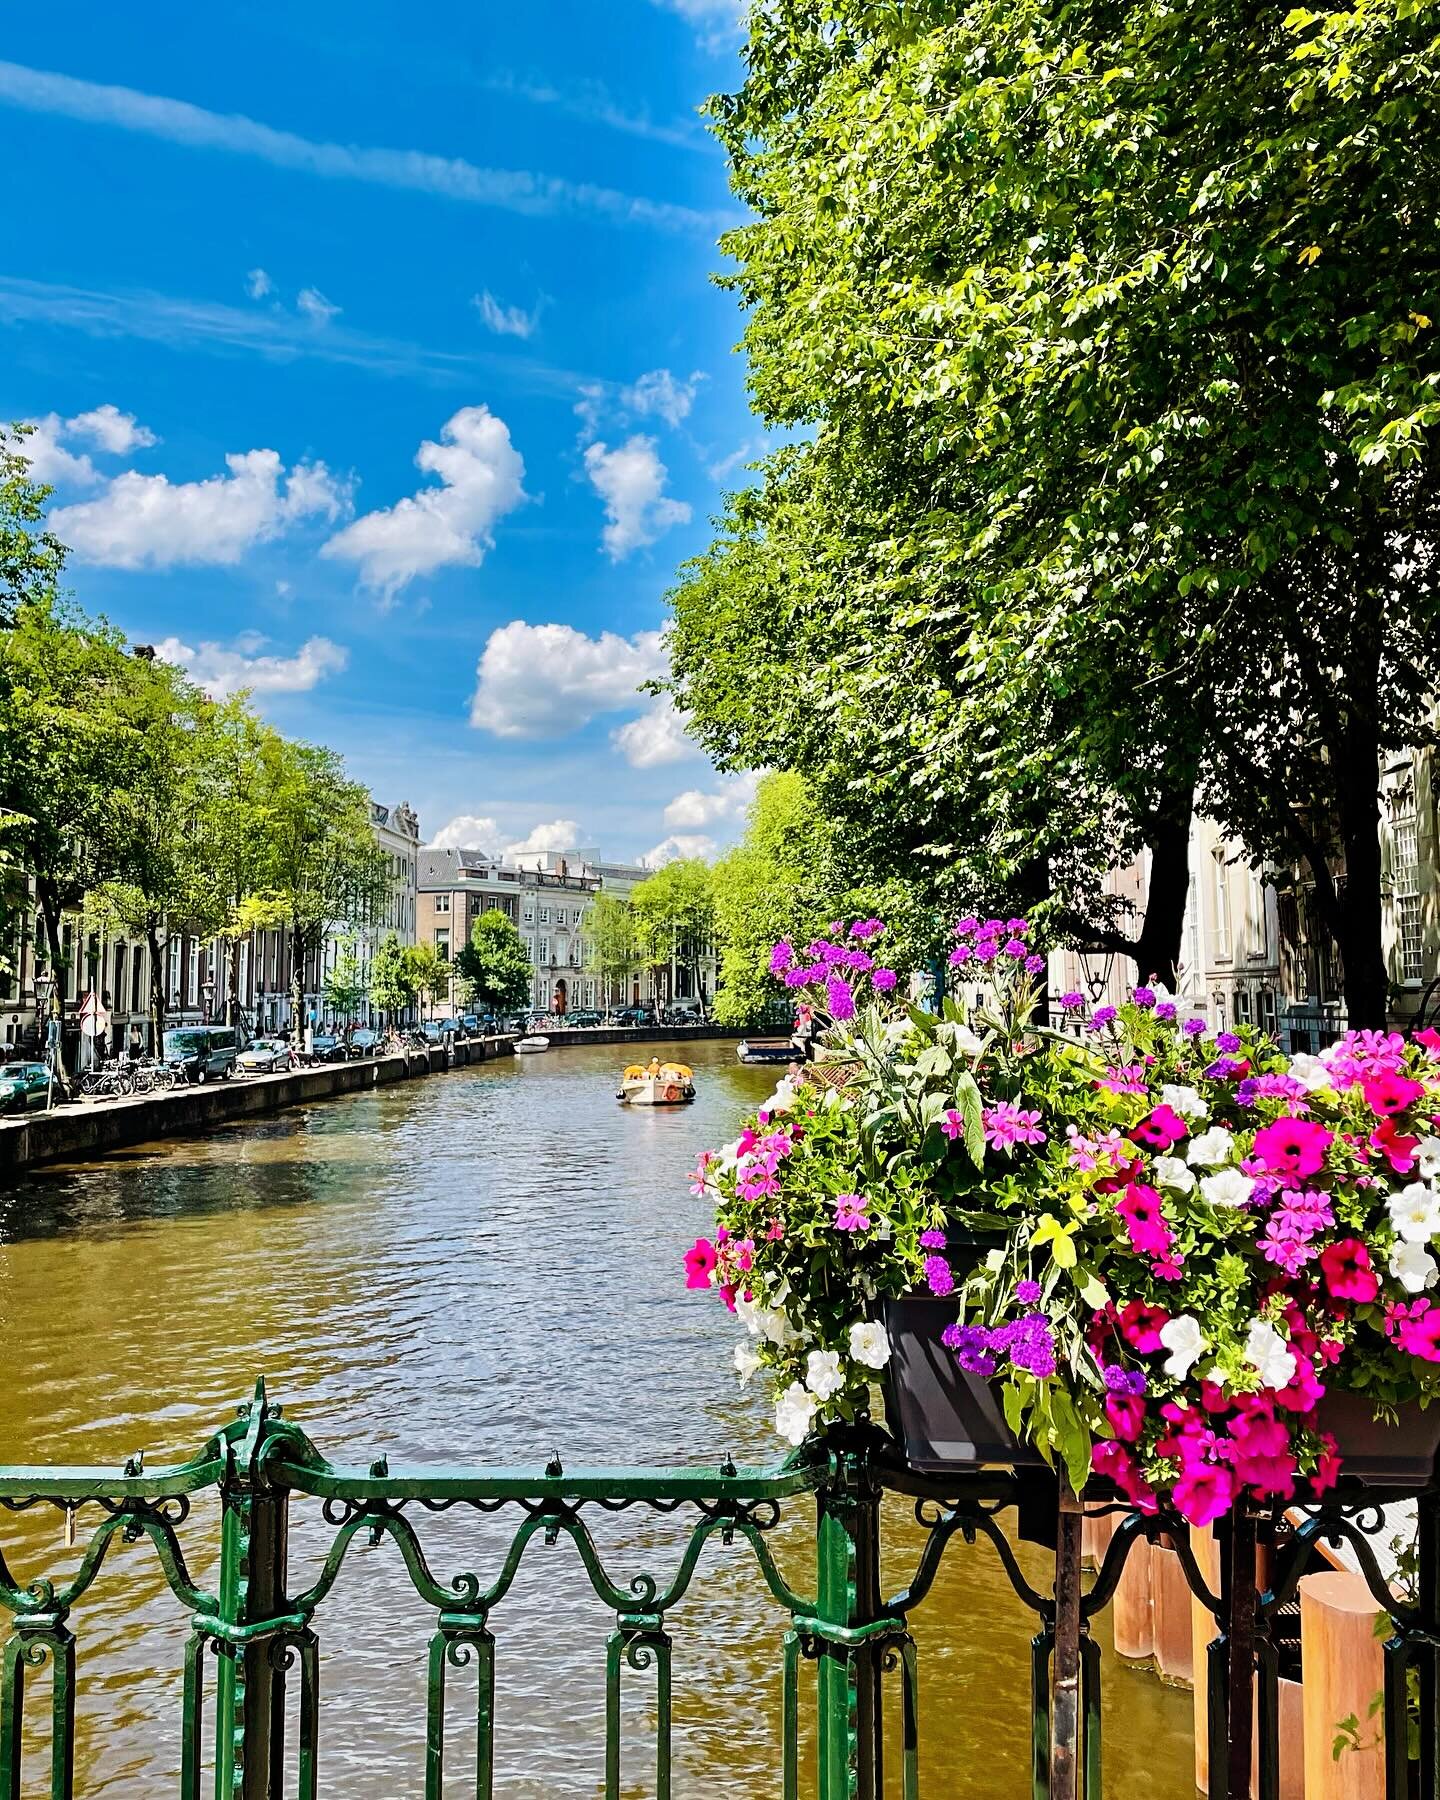 Booking vibrant Amsterdam 💐🌸💐🌺💐🌷💐 for longtime VIP clients today. It&rsquo;s always a treat to put beautiful destinations on the horizon for special people. #traveladvisor #luxurytravel #amsterdam